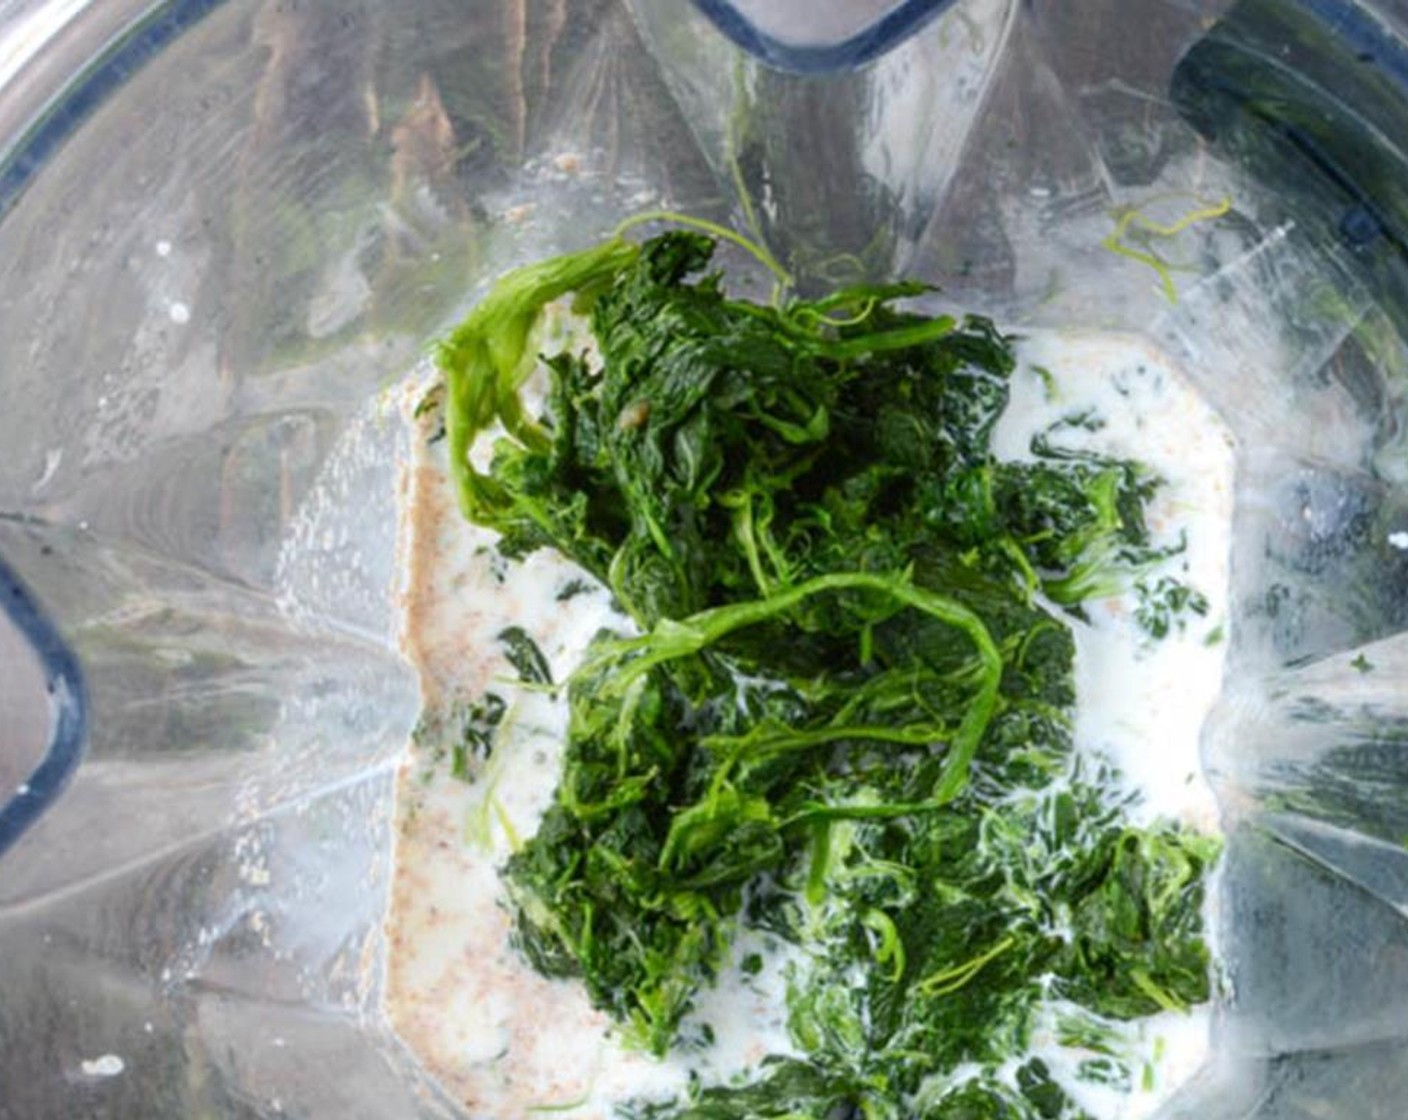 step 4 If you have a high-powered professional blender (like a Vitamix) place the Eggs (4), Half and Half (1 cup), Ground Nutmeg (1/4 tsp), and spinach in the blender and turn on low, gradually increasing the speed until emulsified and bright green.